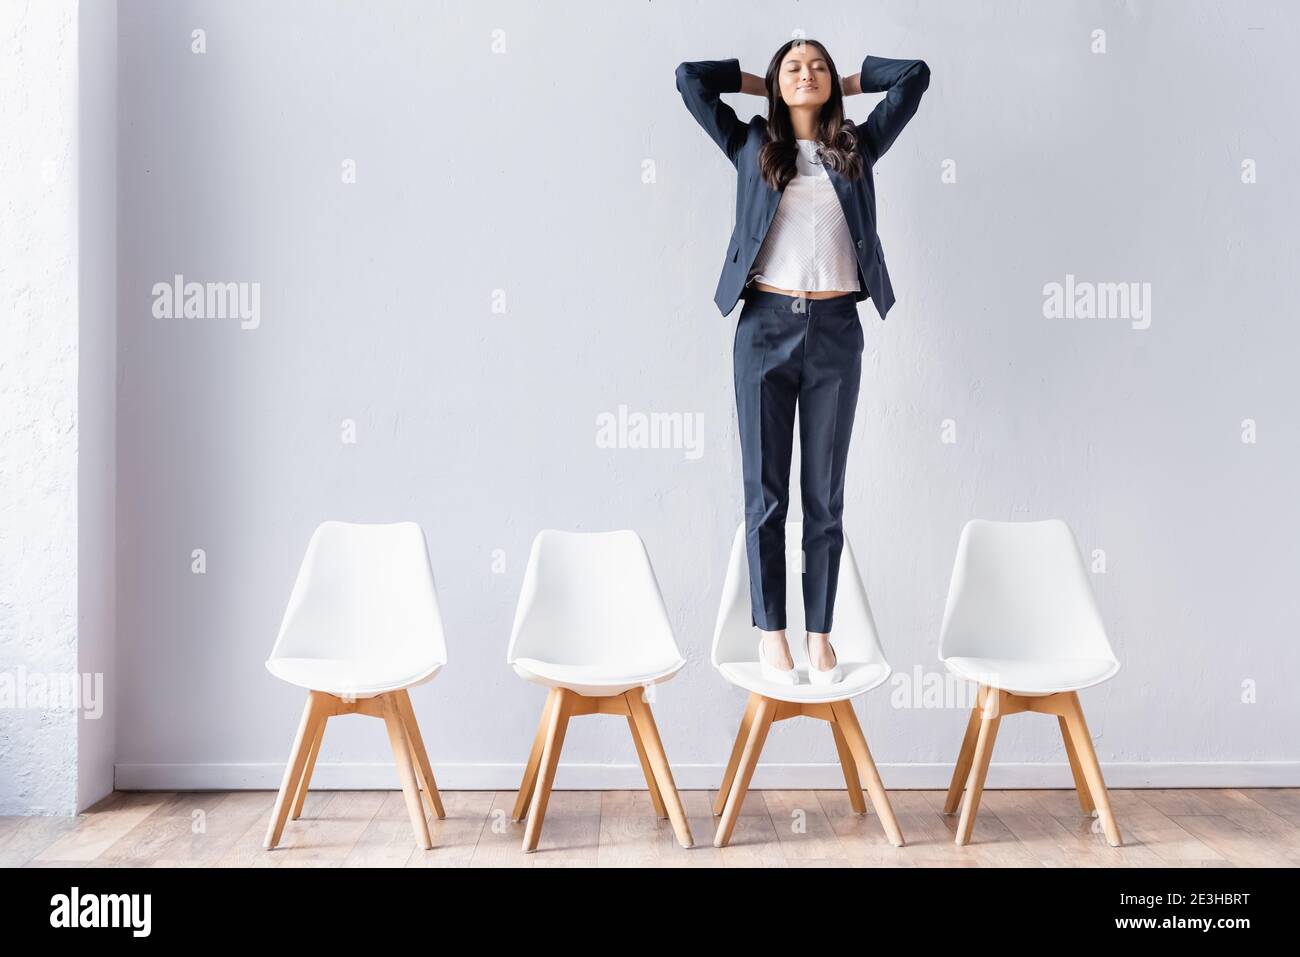 Asian businesswoman standing with closed eyes on chair in office Stock Photo